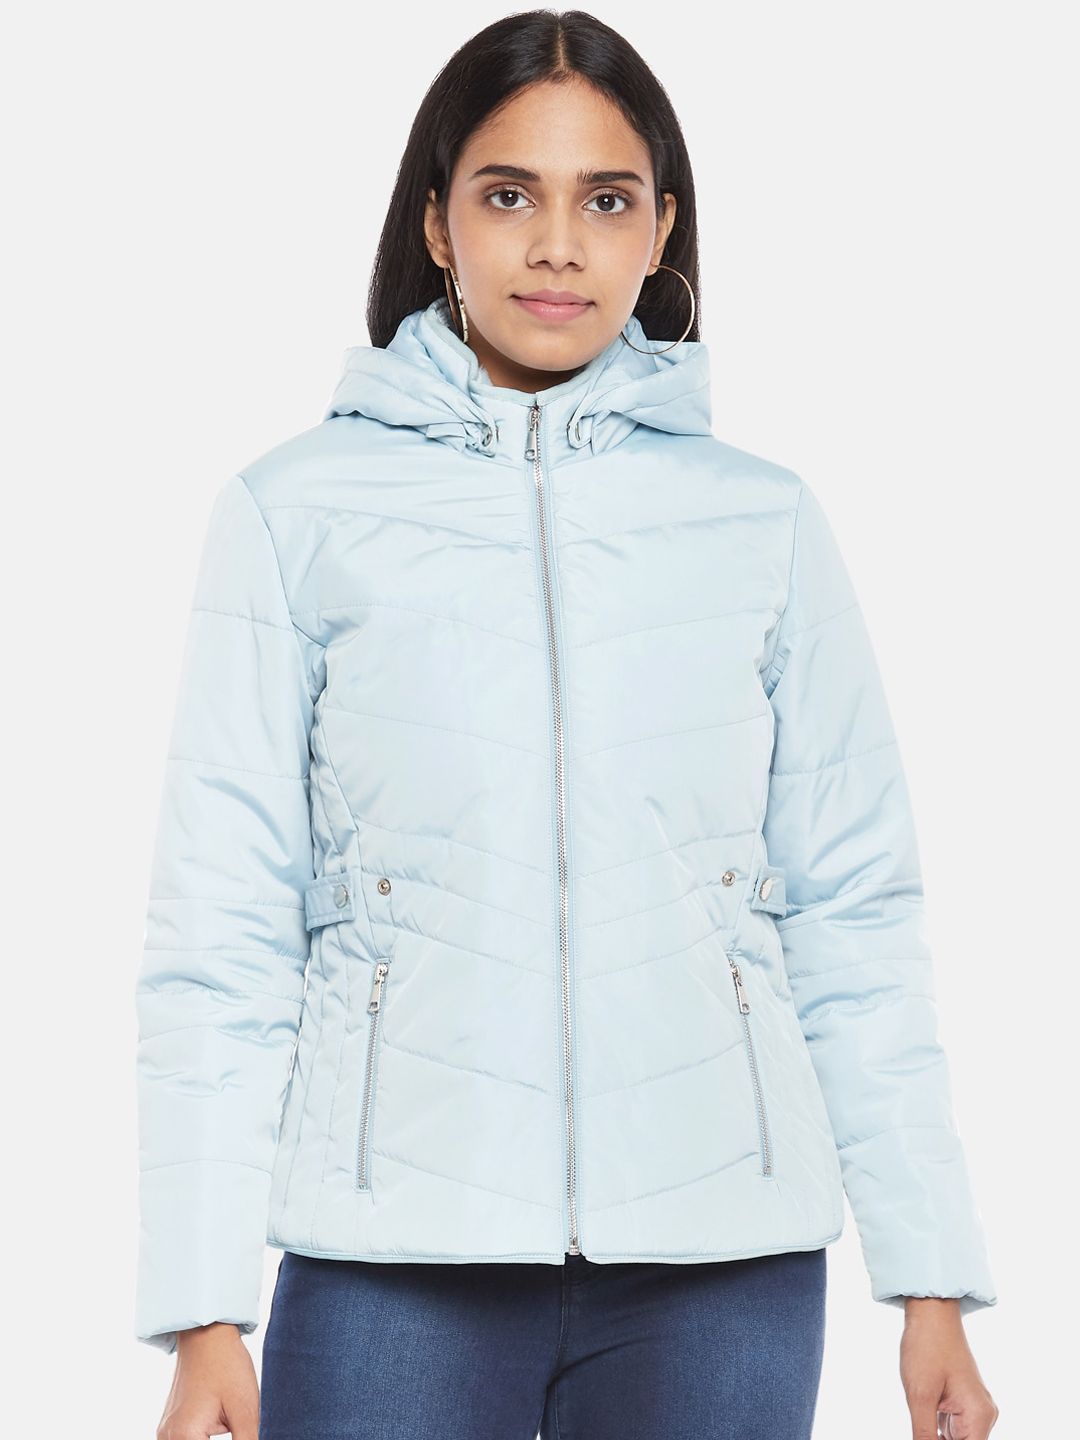 Honey by Pantaloons Women Blue Puffer Jacket Price in India